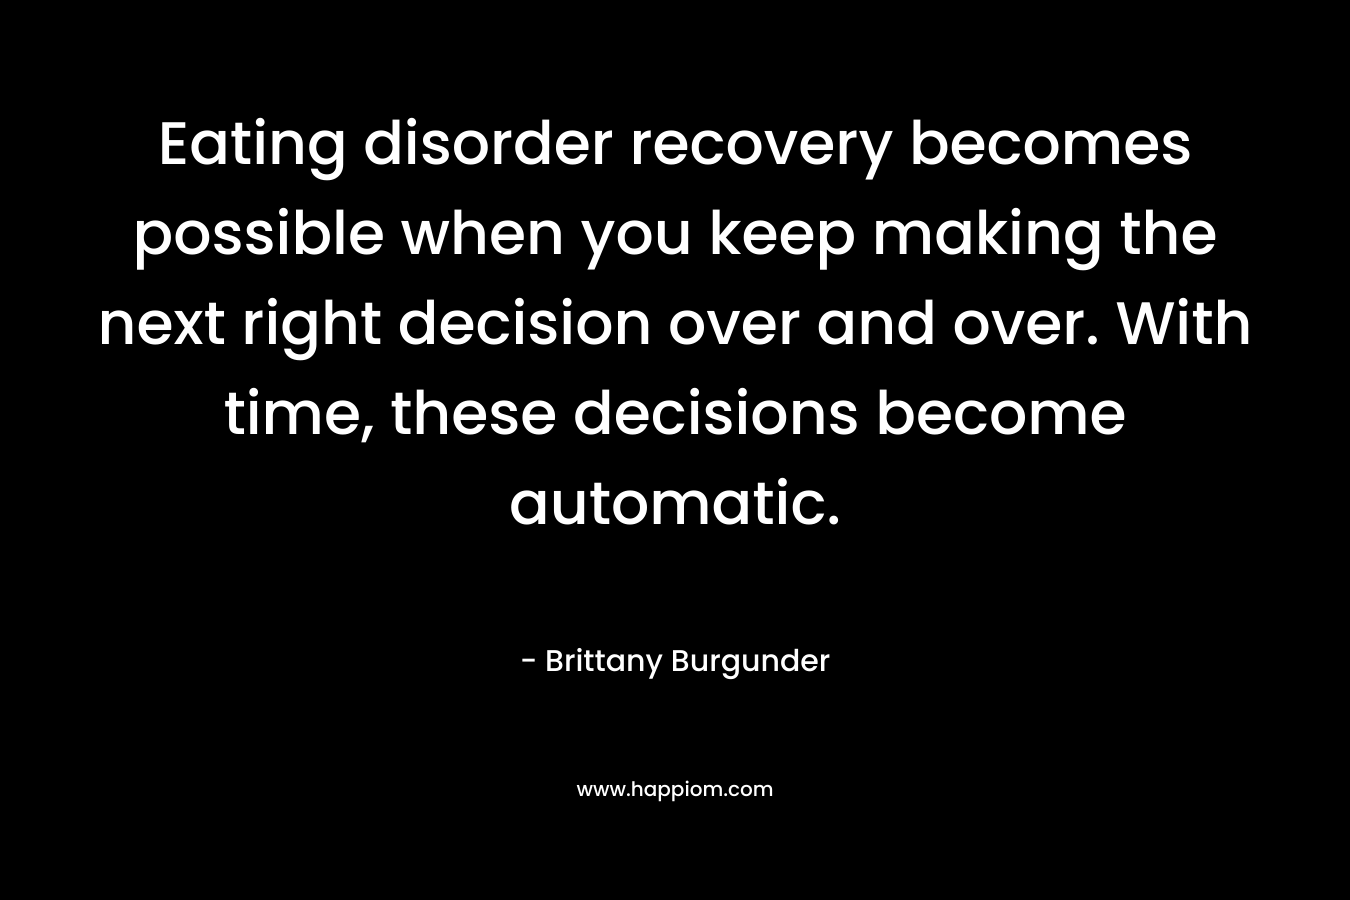 Eating disorder recovery becomes possible when you keep making the next right decision over and over. With time, these decisions become automatic.